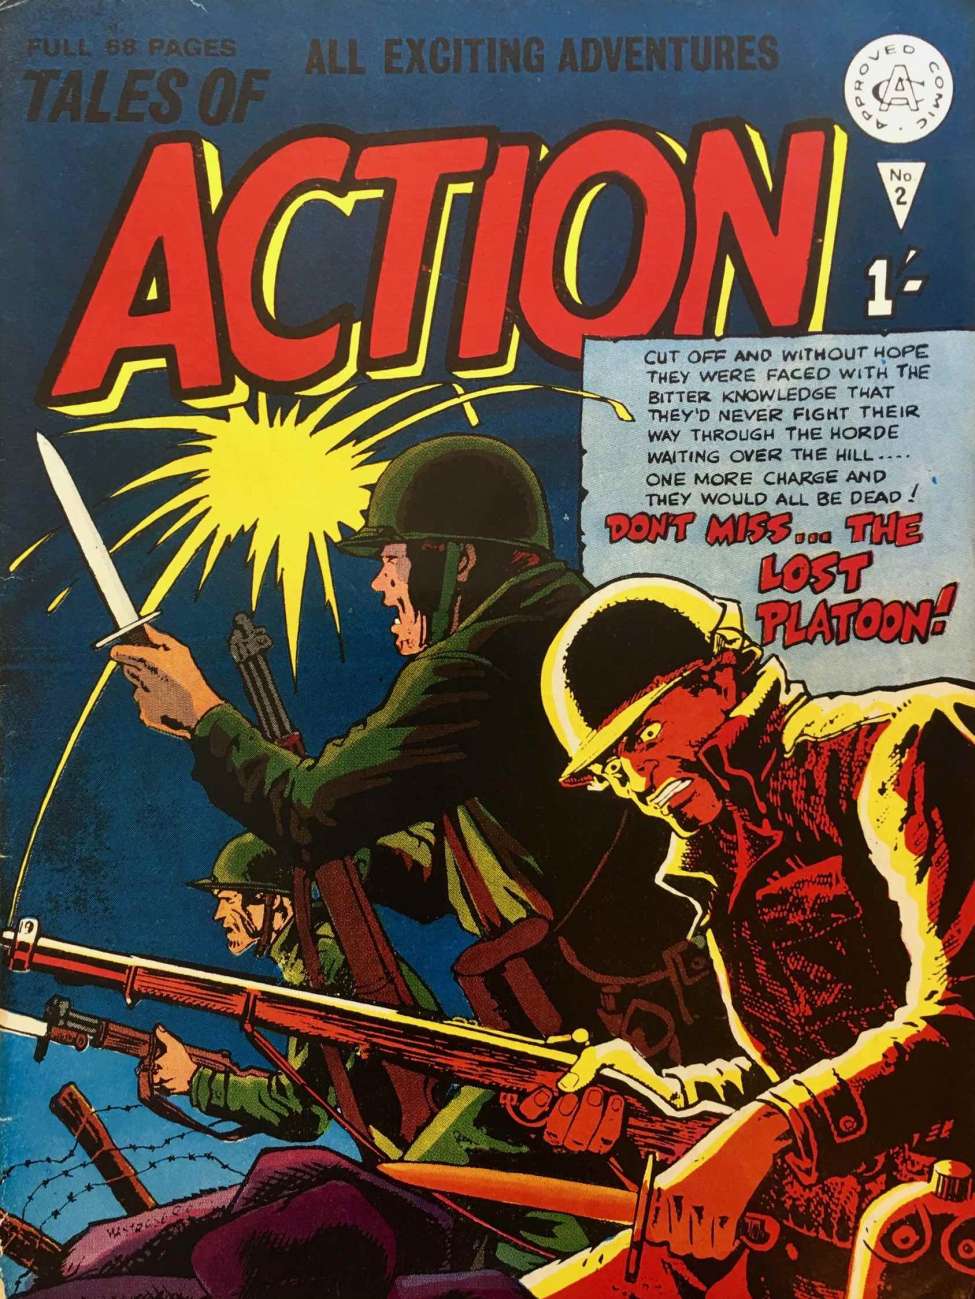 Book Cover For Tales of Action 2